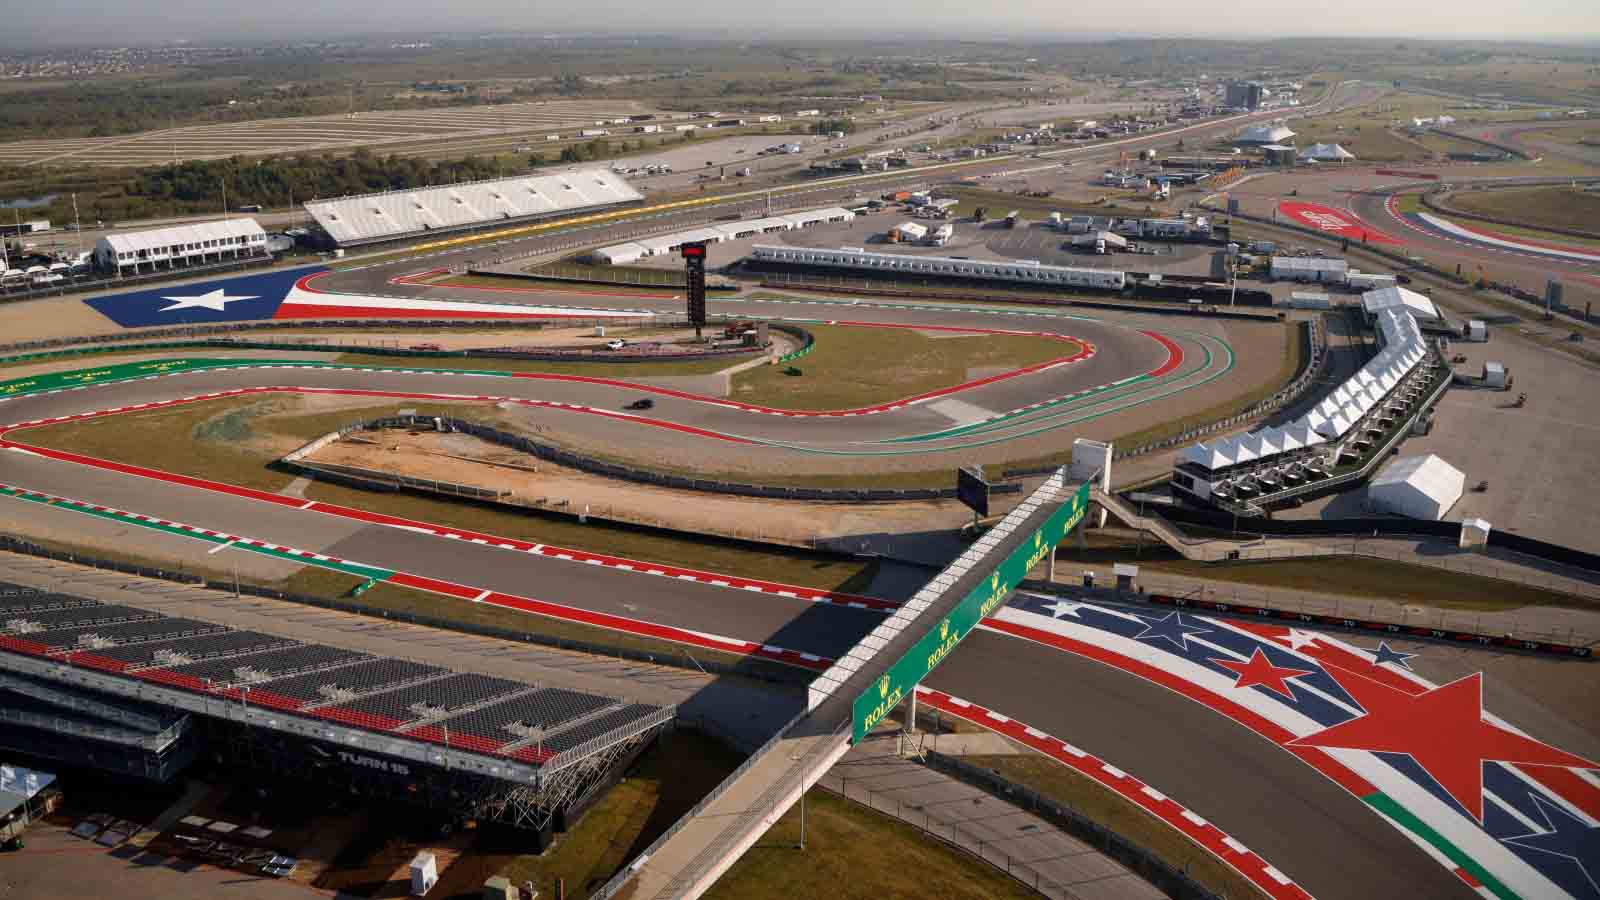 COTA put F1 fans at the heart of the action with new central grandstand